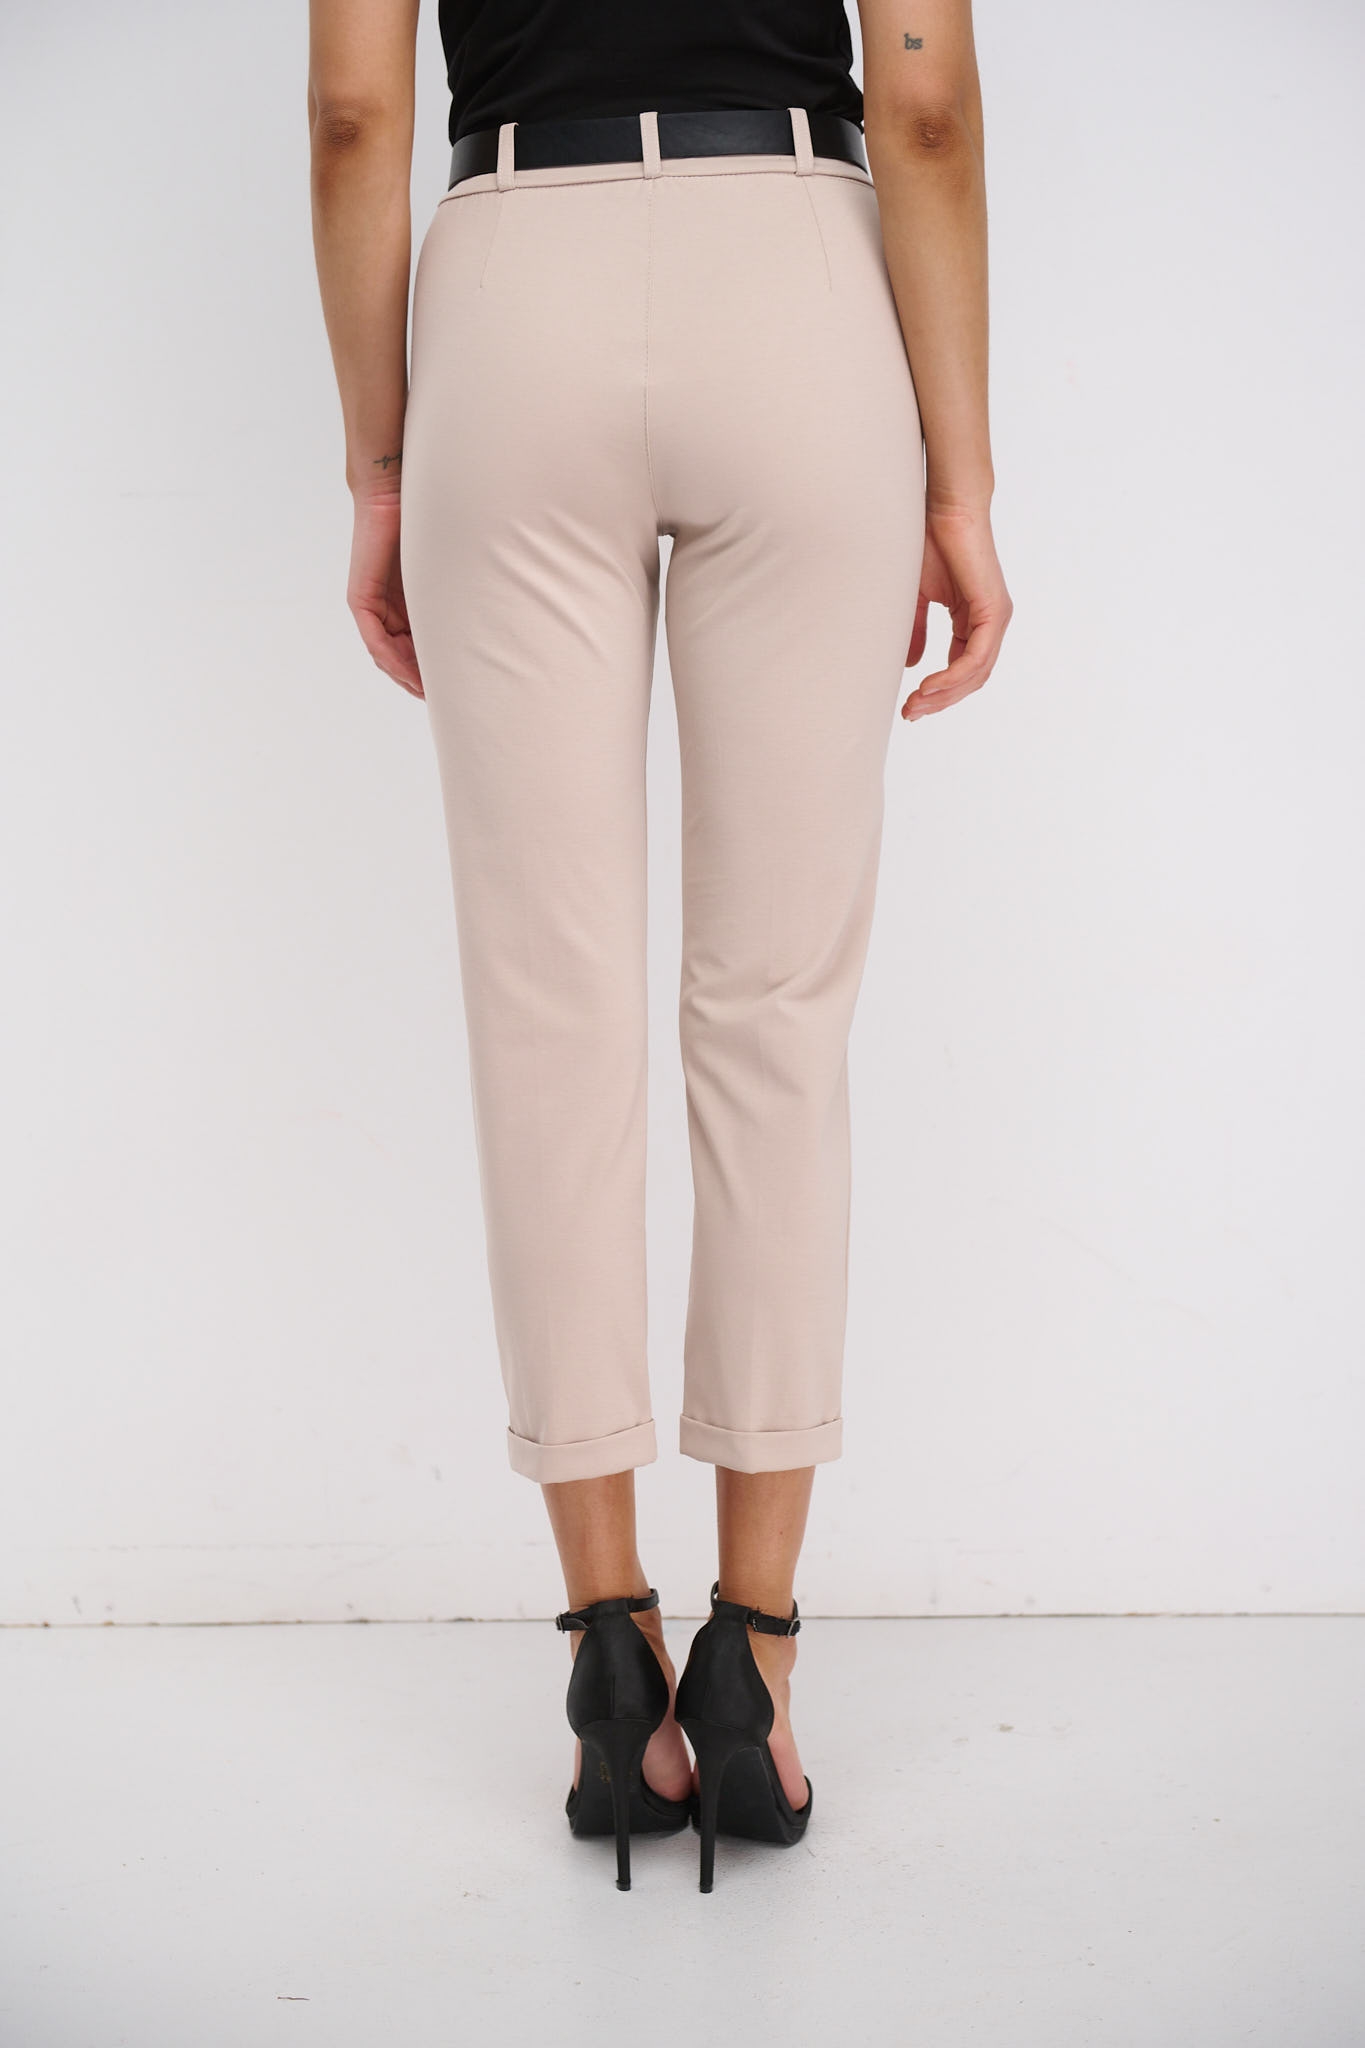 Simple Chino Pants With Belt